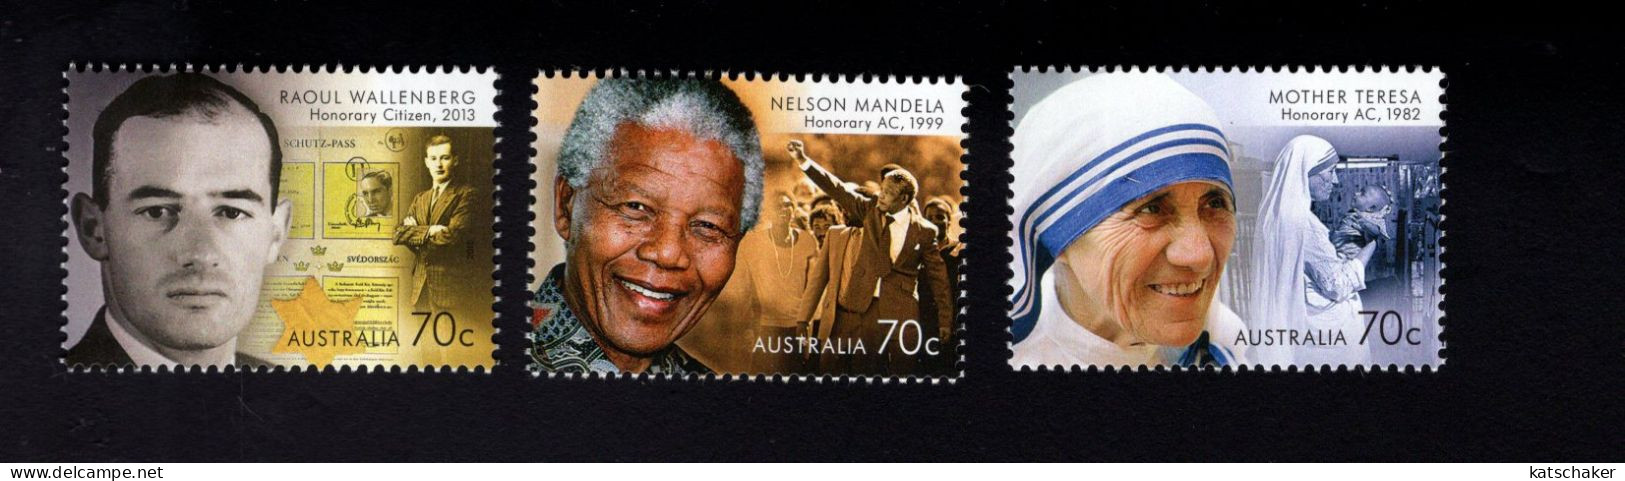 1770325645 2015 SCOTT 4361 - 4363  (XX)  POSTFRIS MINT NEVER HINGED  - FAMOUS PEOPLE HONOURED BY AUSTRALIA - Mint Stamps